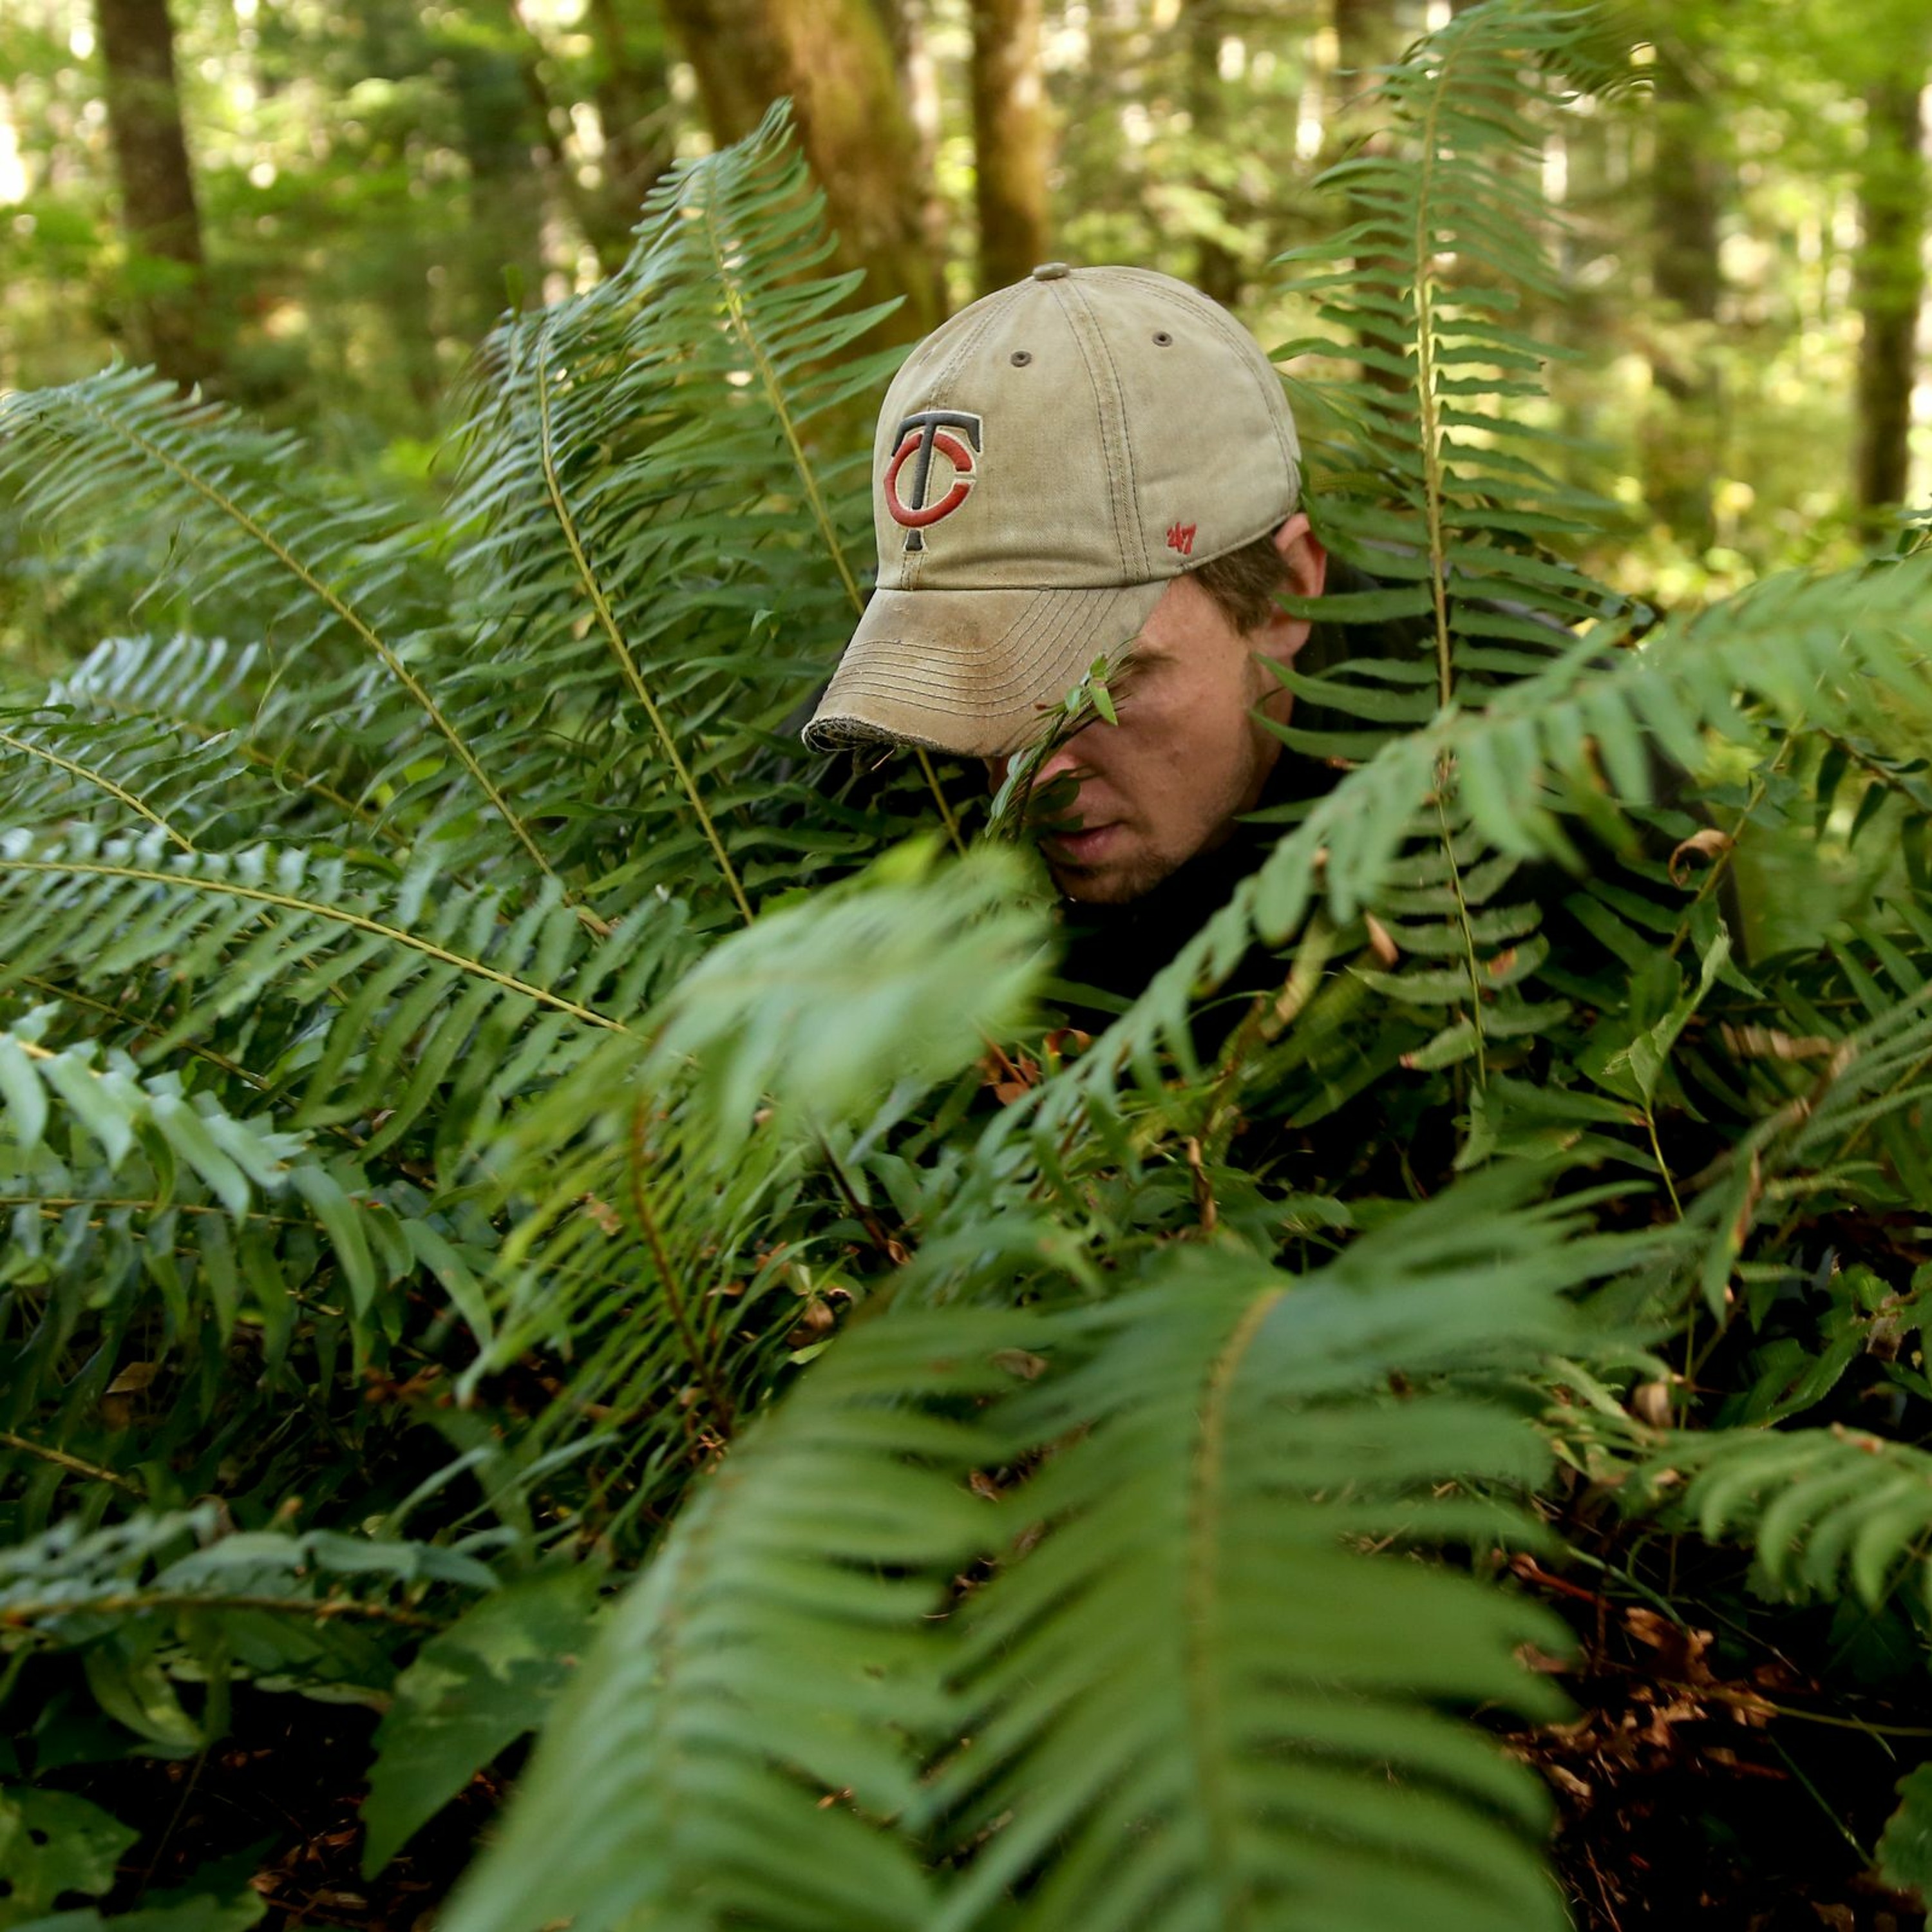 Fern hunt! How to harvest plants from Oregon's national forests for your backyard with a free permit